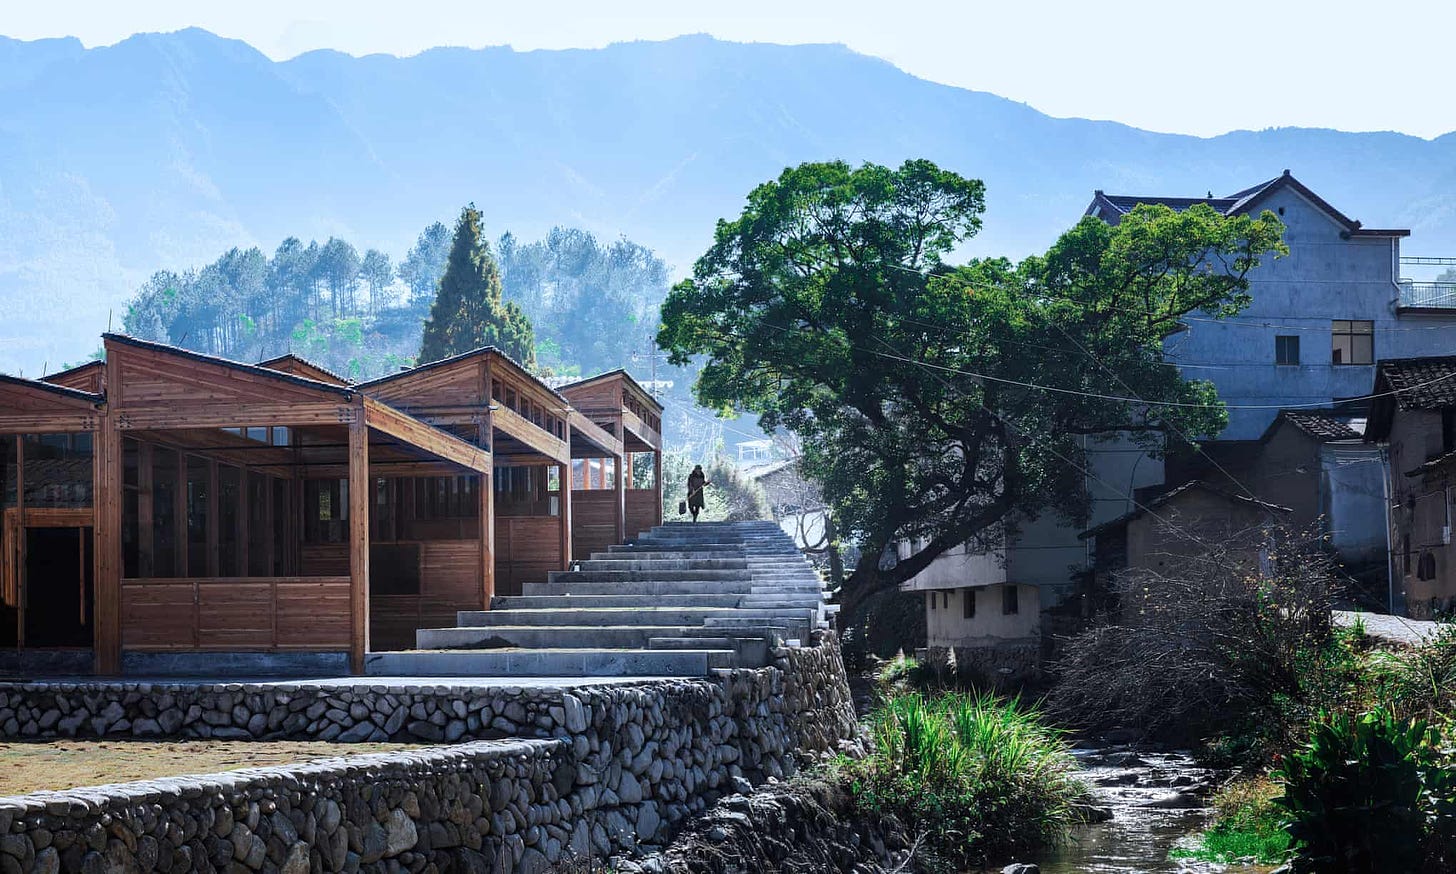 A colour photo of a Chinese mountain village. A series of wooden pavilions step down a slope next to a stream, with mountains and forest in the background